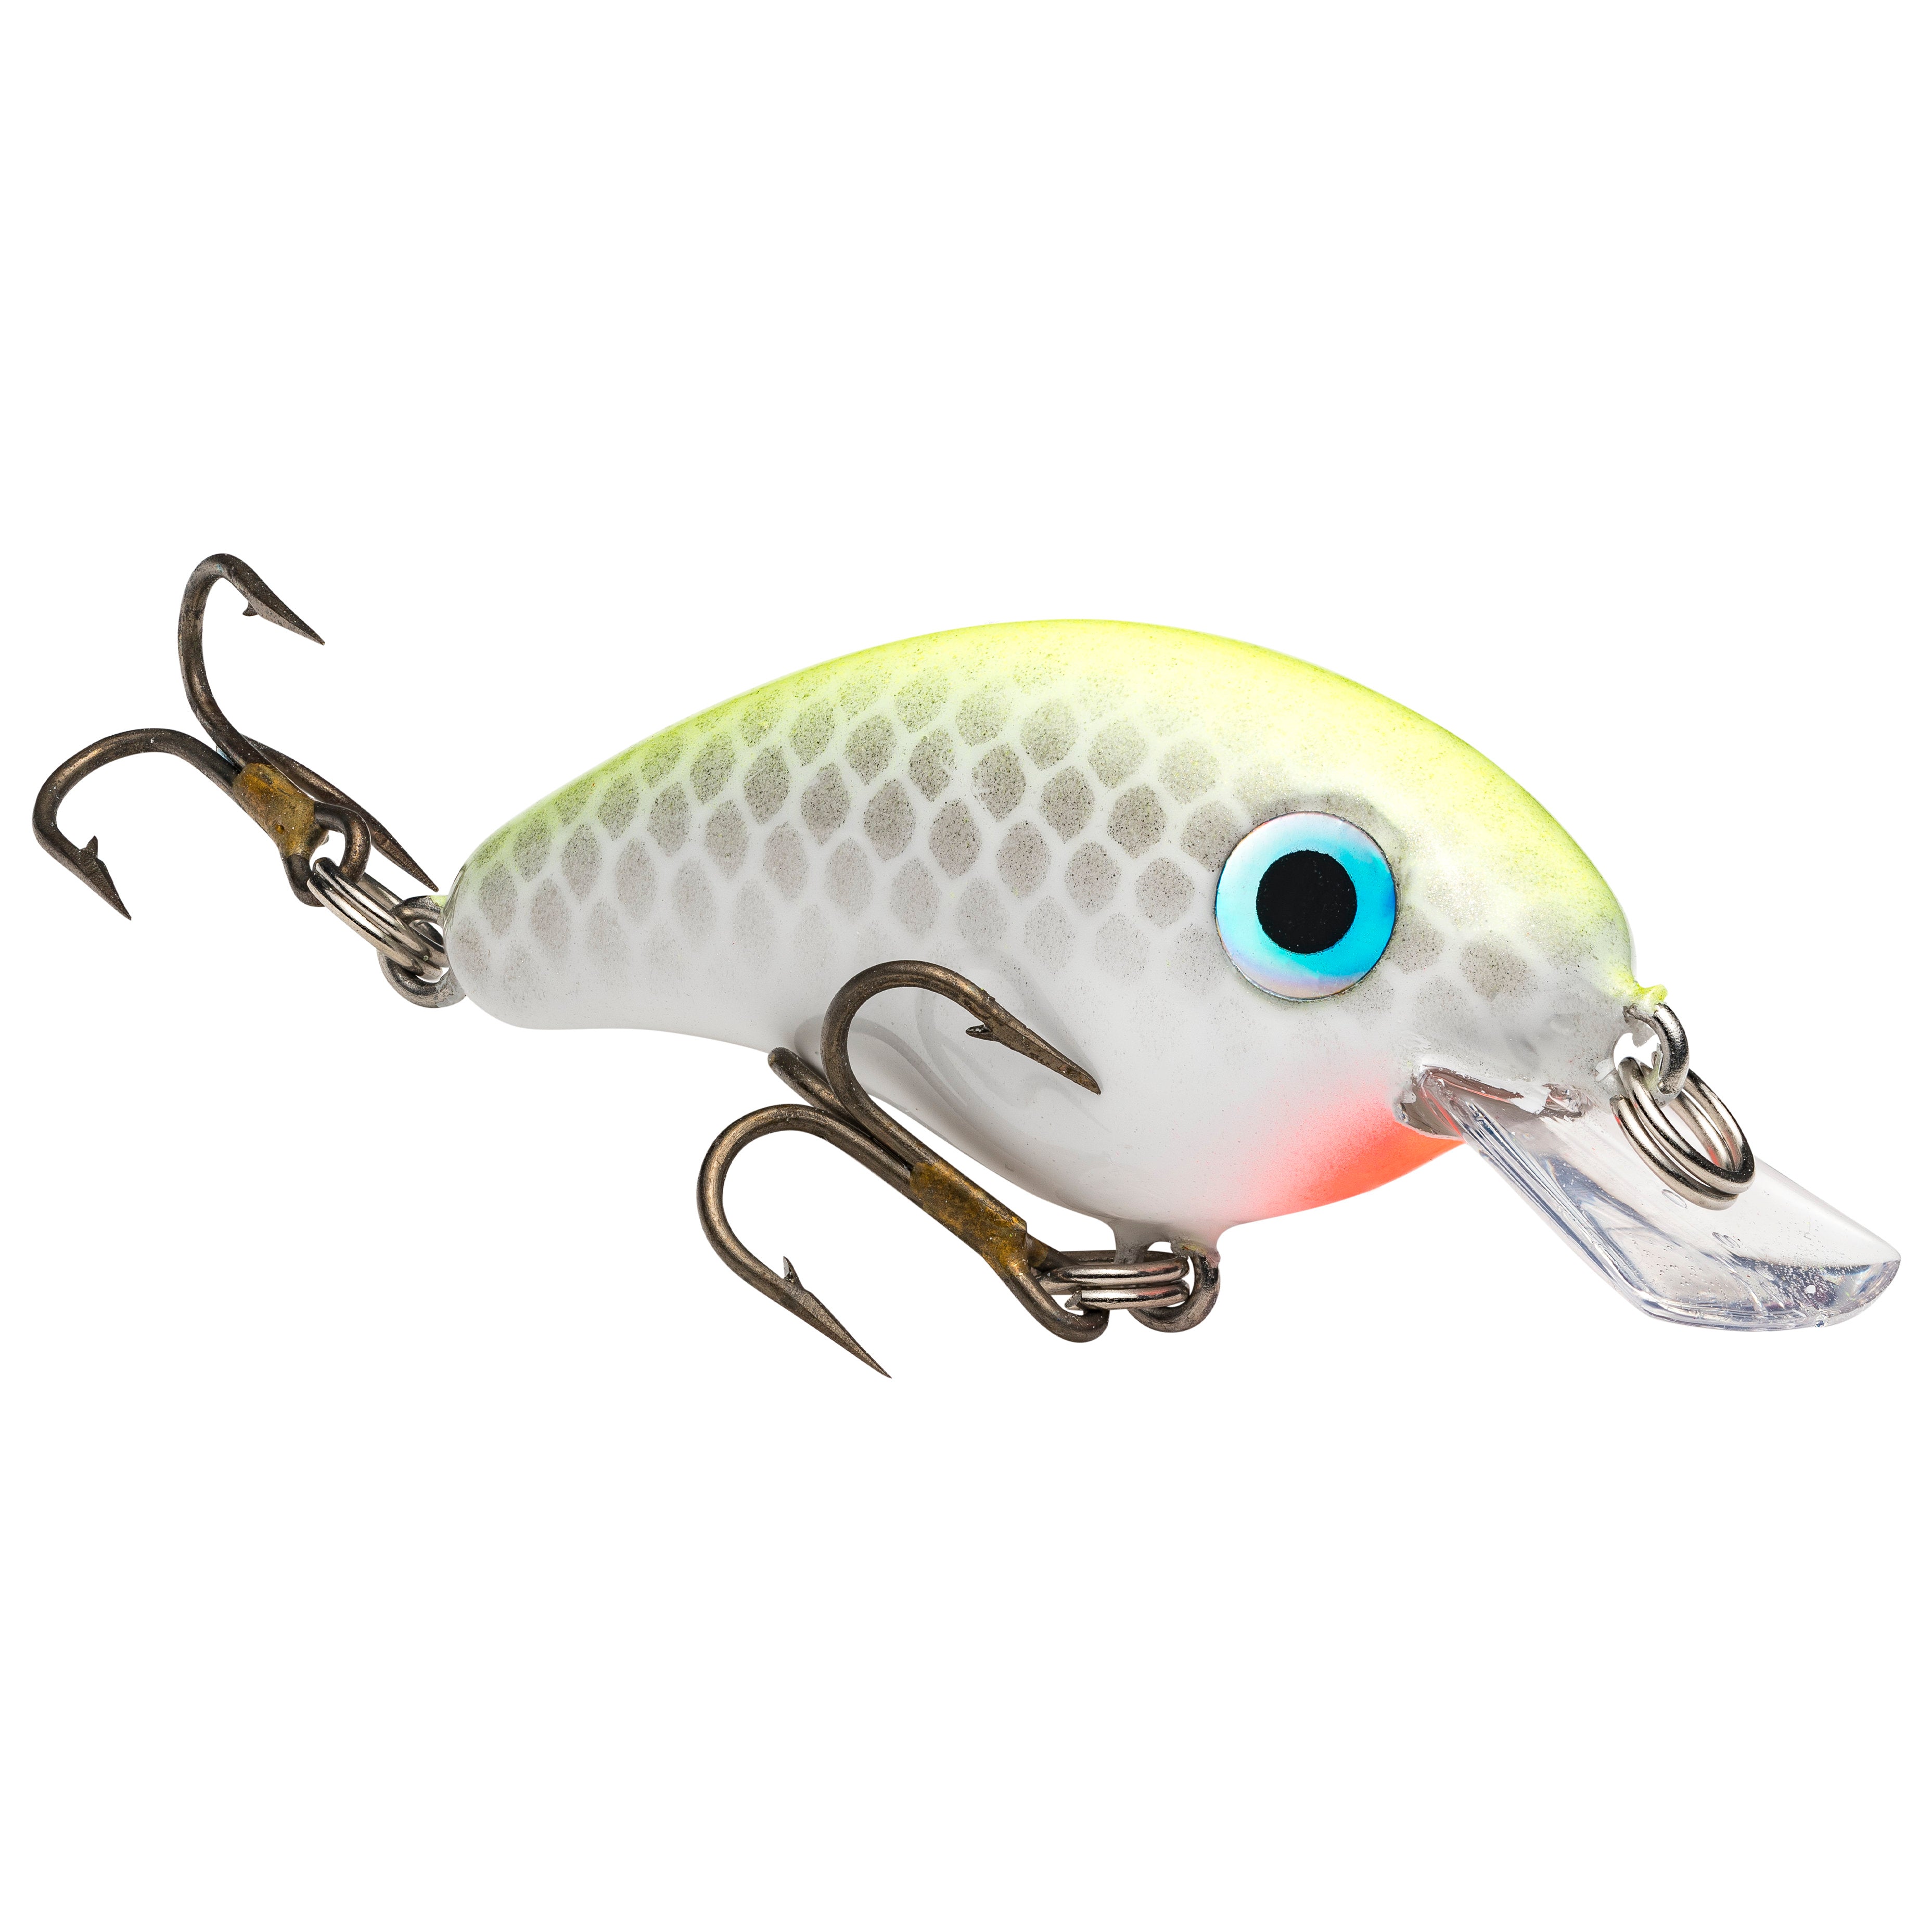 2 Sections 3D Mouse Fishing Lures Hard Plastic Wobbling Rat Artificial  Minnow Bait For Pike Bass Crankbait Fishing Tackle 9008 FishingFishing Lures  Pike Crankbait From 13,59 €